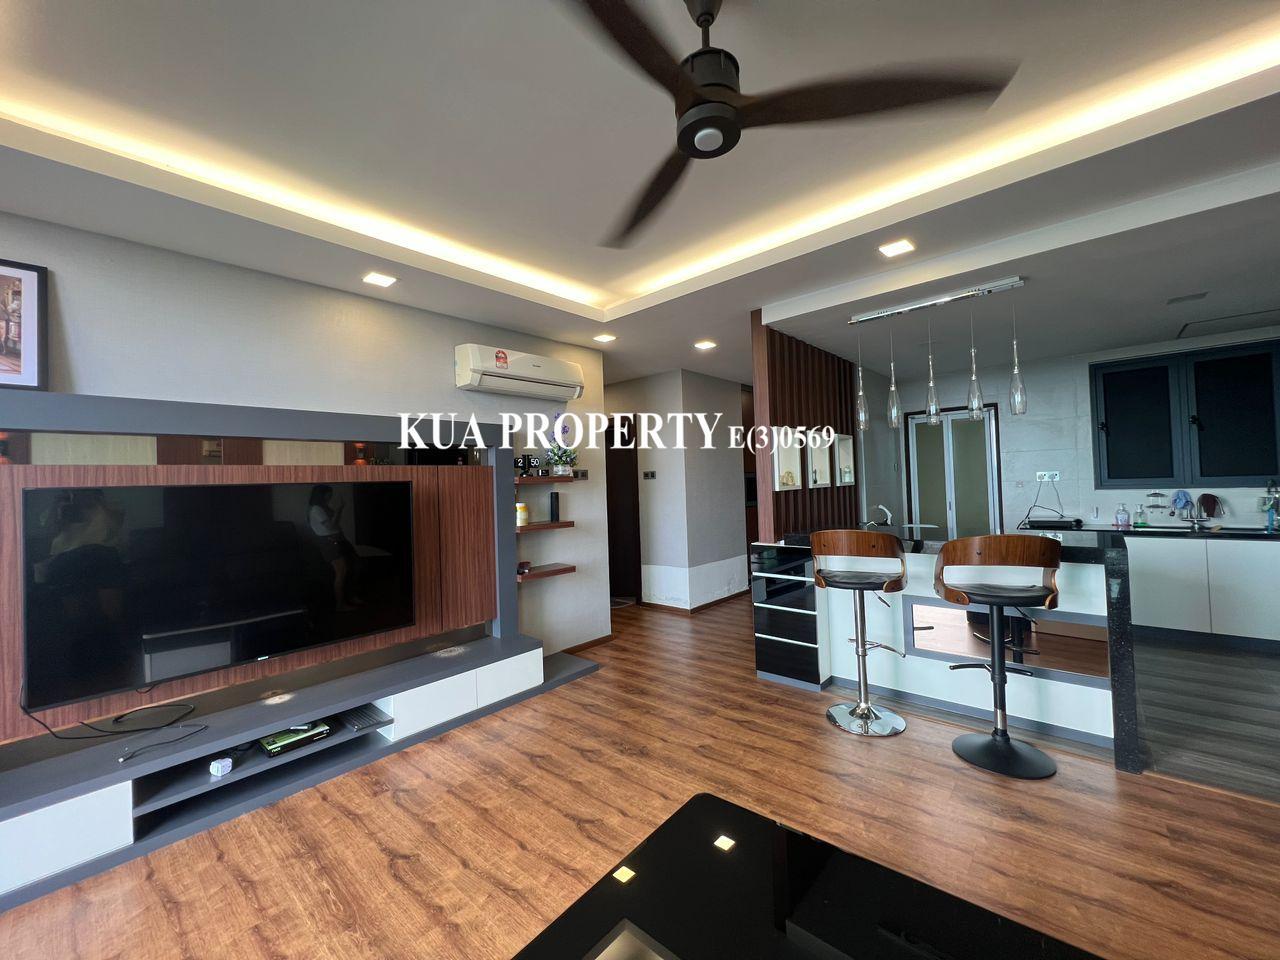 Viva Jazz 3 Apartment For Rent! Located at Jalan Wan Alwi